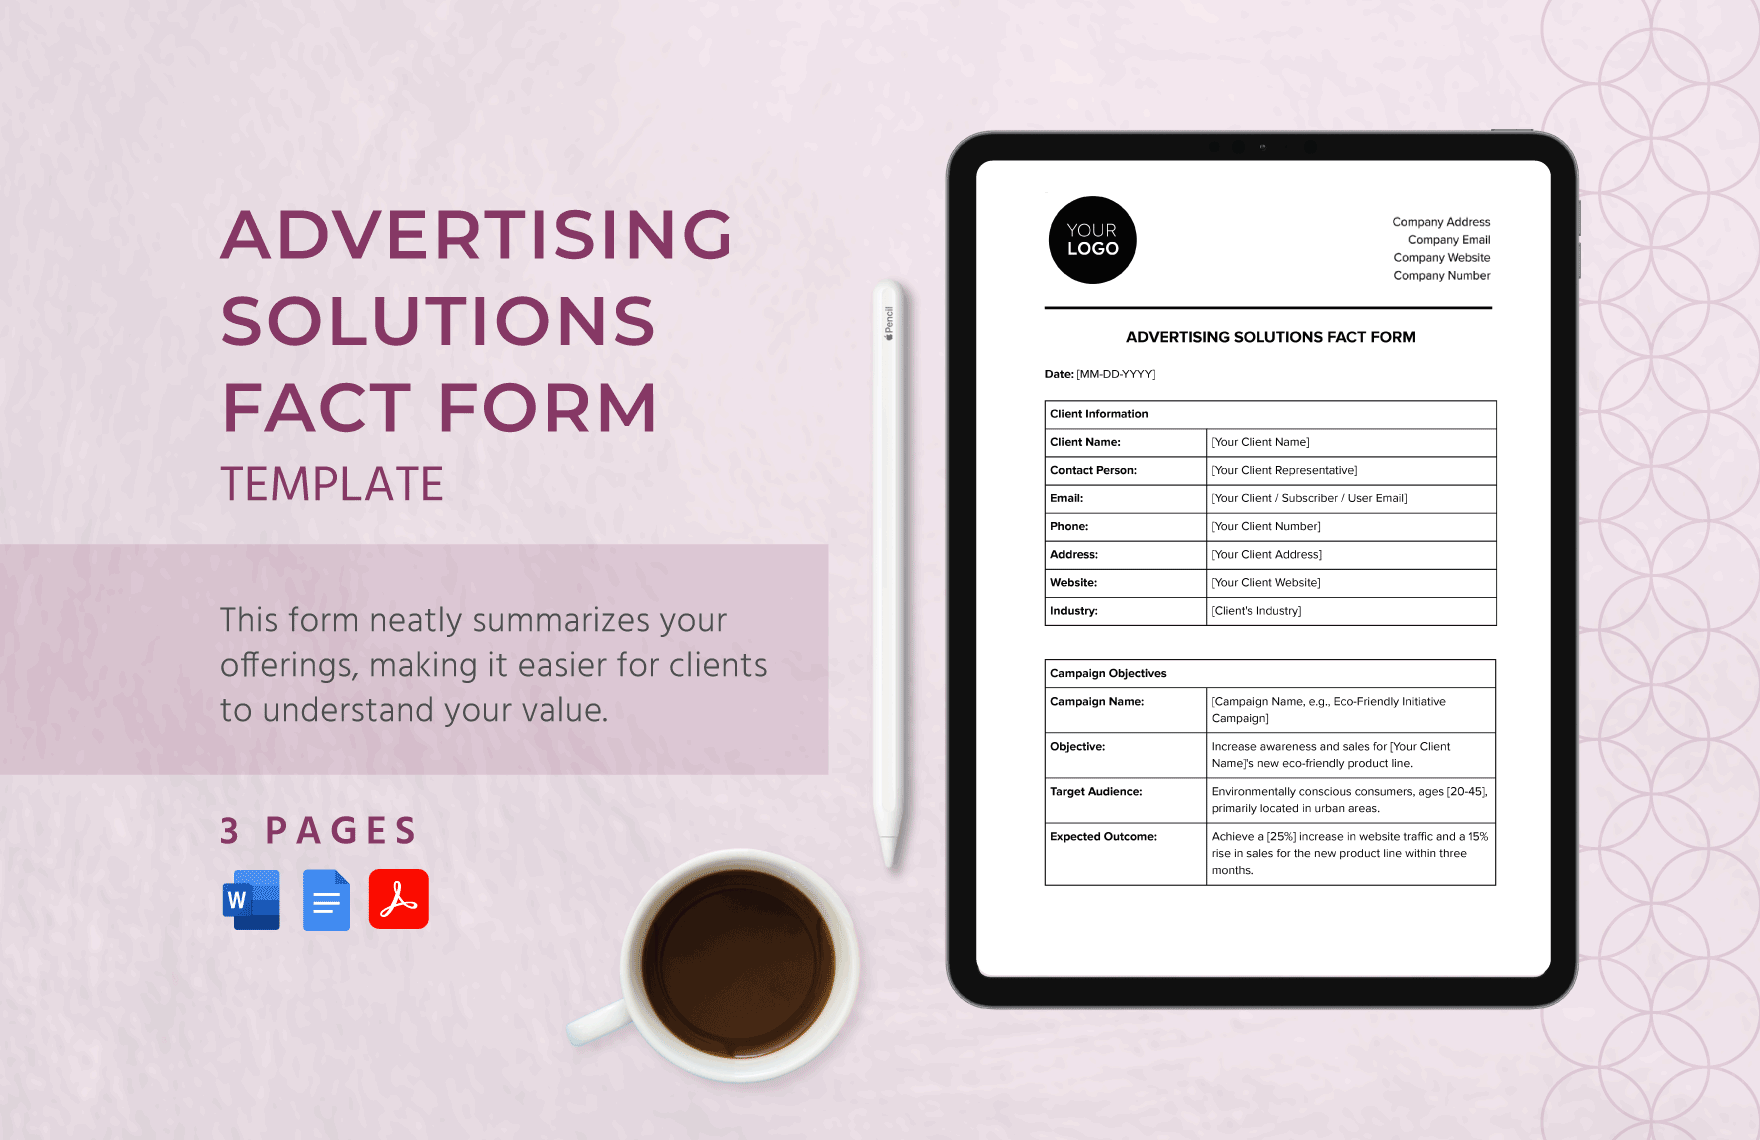 Advertising Solutions Fact Form Template in Word, Google Docs, PDF